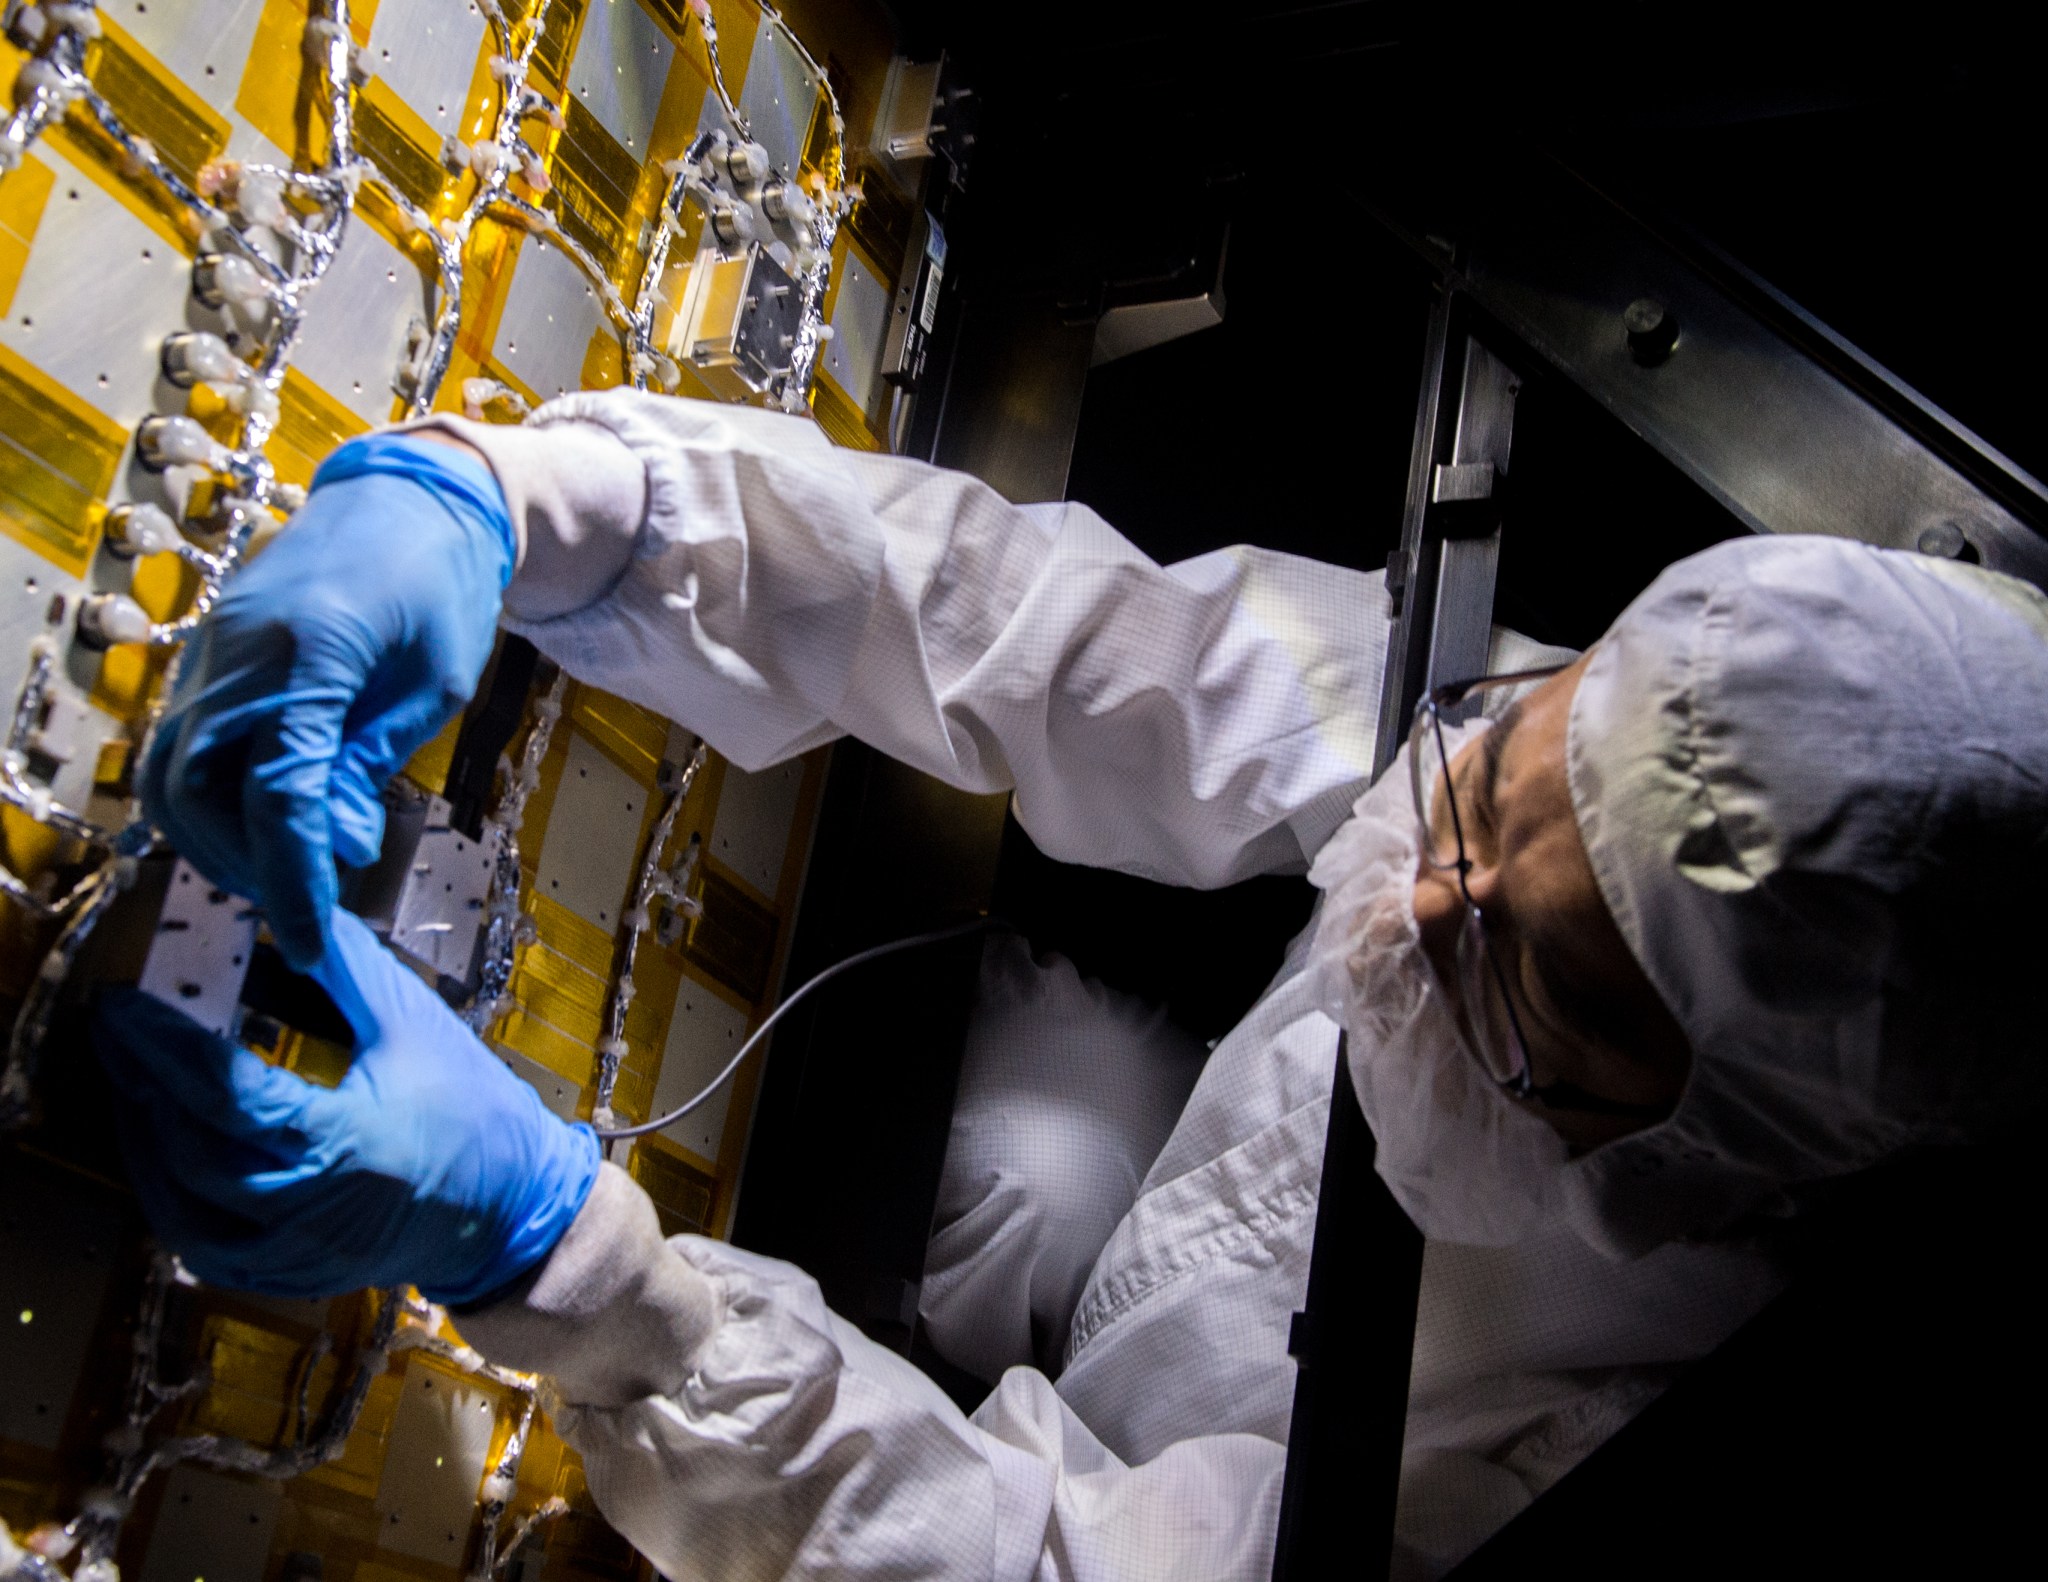 A person wearing a cleanroom protective gear, including a hat, facemask, body suit, and gloves, leans over an electronis panel. The panel has gold and white rectangles with silver-wrapped wires running between the rectangles.